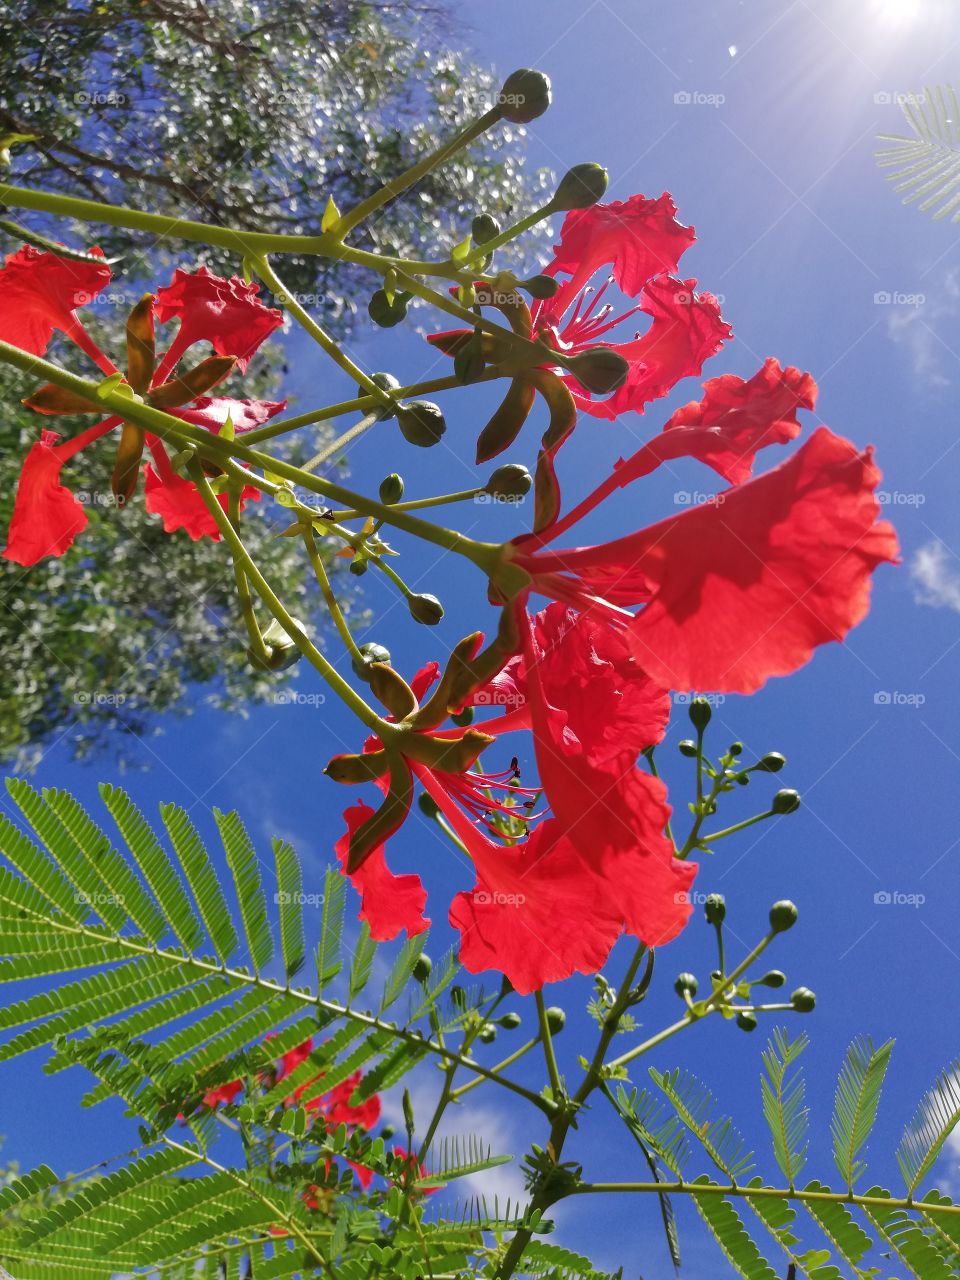 Red flowers in summer